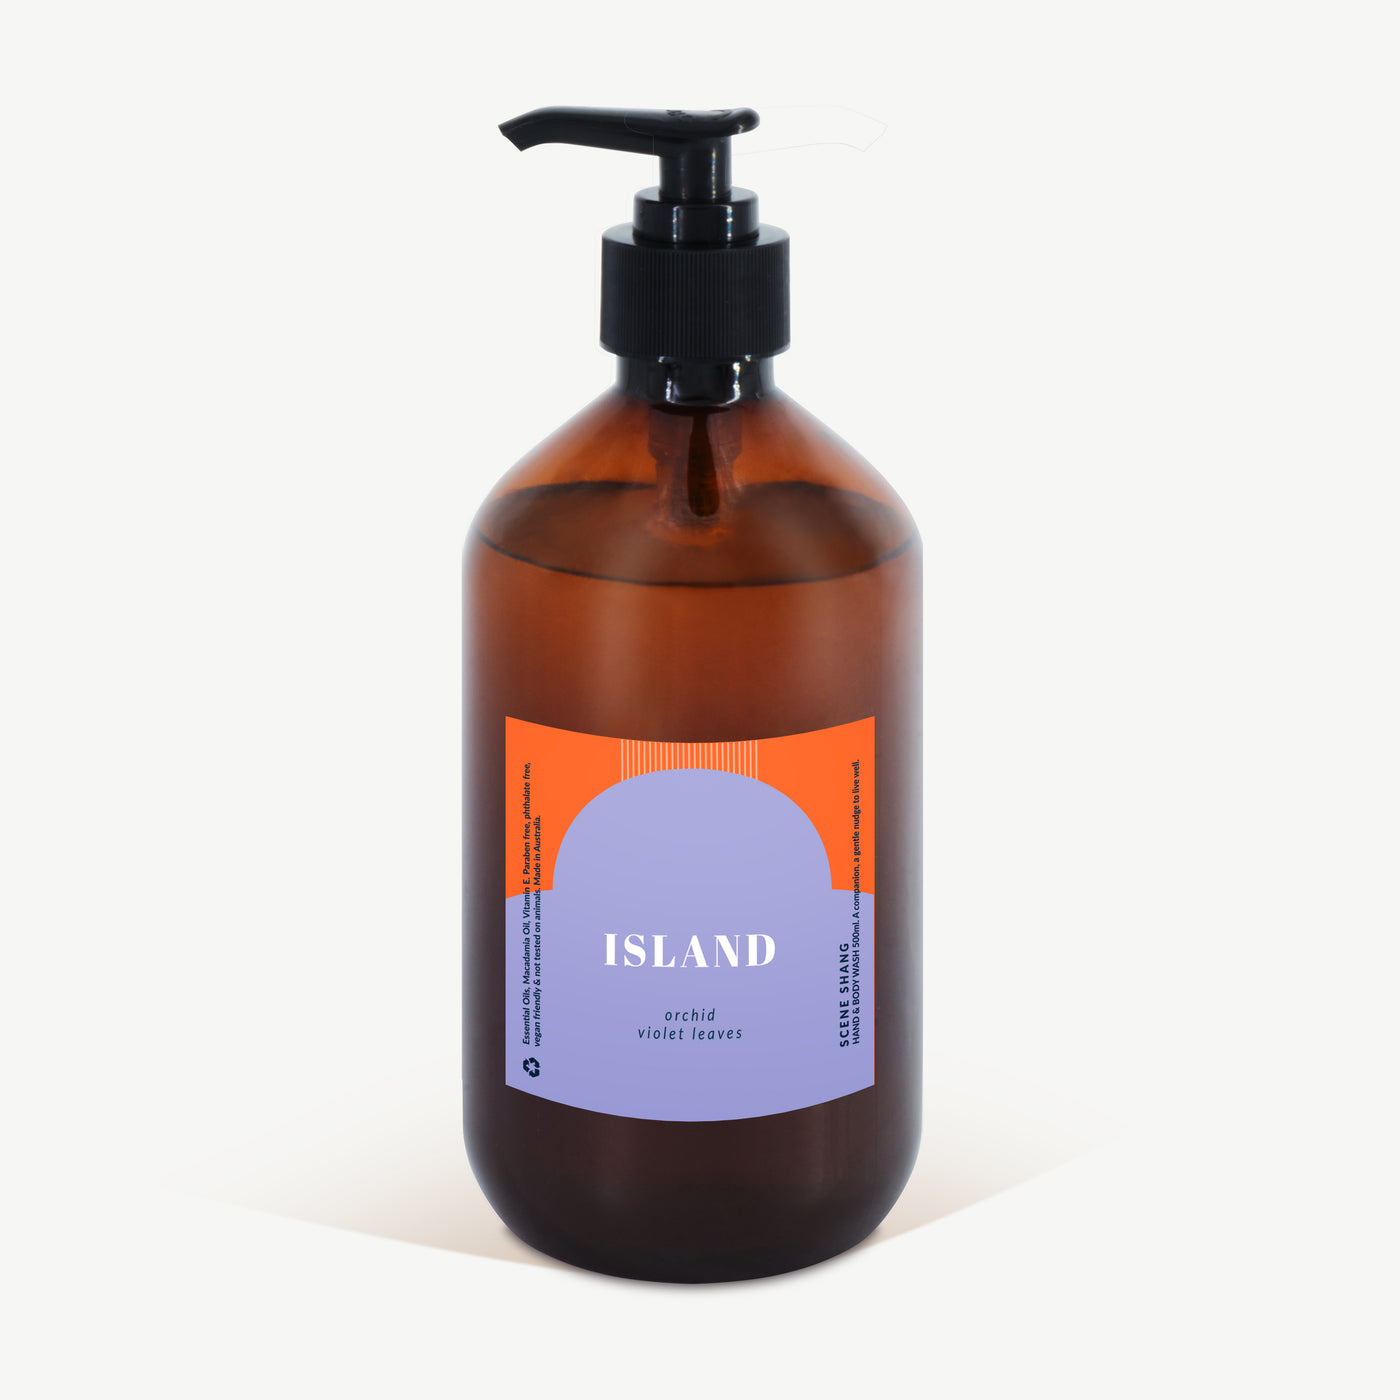 ISLAND Hand & Body Wash (Orchid, Violet Leaves)